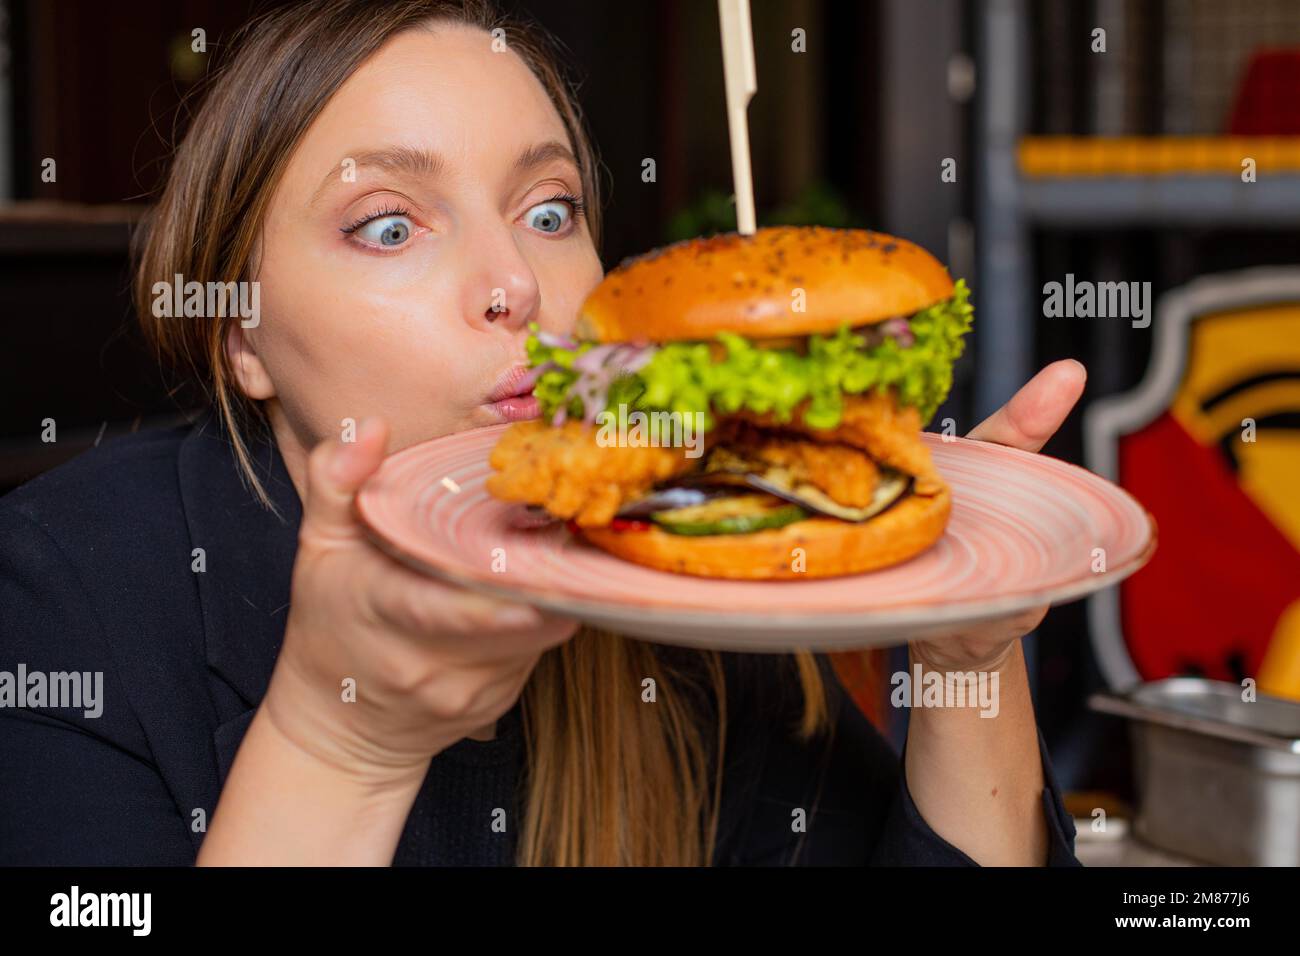 Portrait of surprised woman staring wide-eyed at burger with lettuce, chicken, onion on big plate in cafe restaurant. Stock Photo